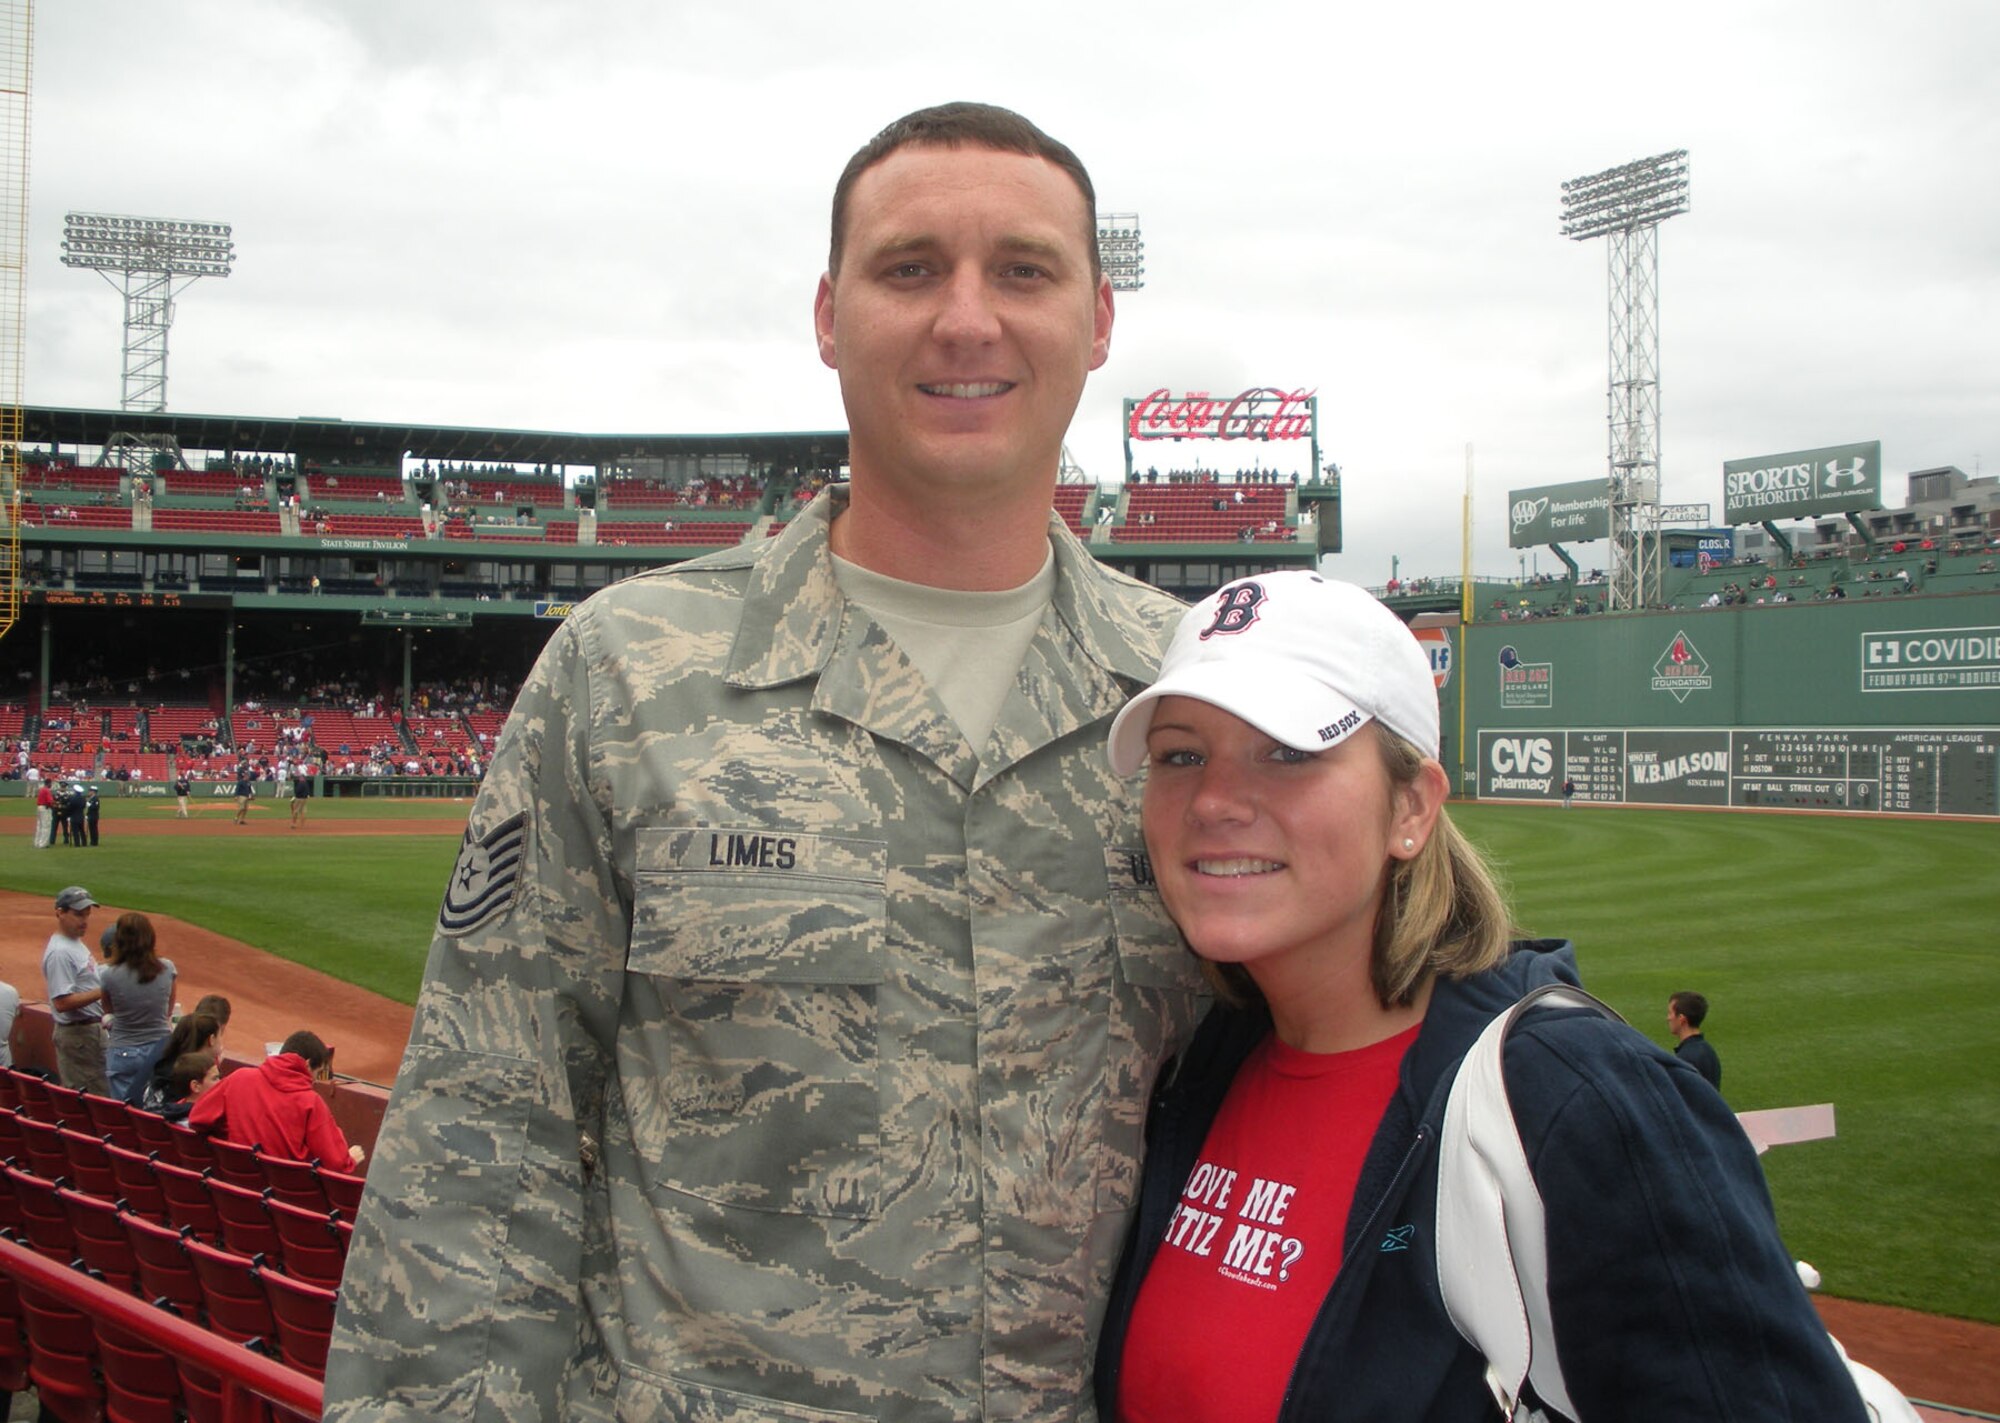 BOSTON – Tech. Sgt. Andrew Limes, 66th Security Forces Squadron’s Military Working Dogs section kennel master, and his fiancée, Lauren Joyce, take in a Red Sox game at Fenway Park. The couple met on the Green Monster four years ago and is now competing for “A Wedding to Remember.” (Courtesy photo)